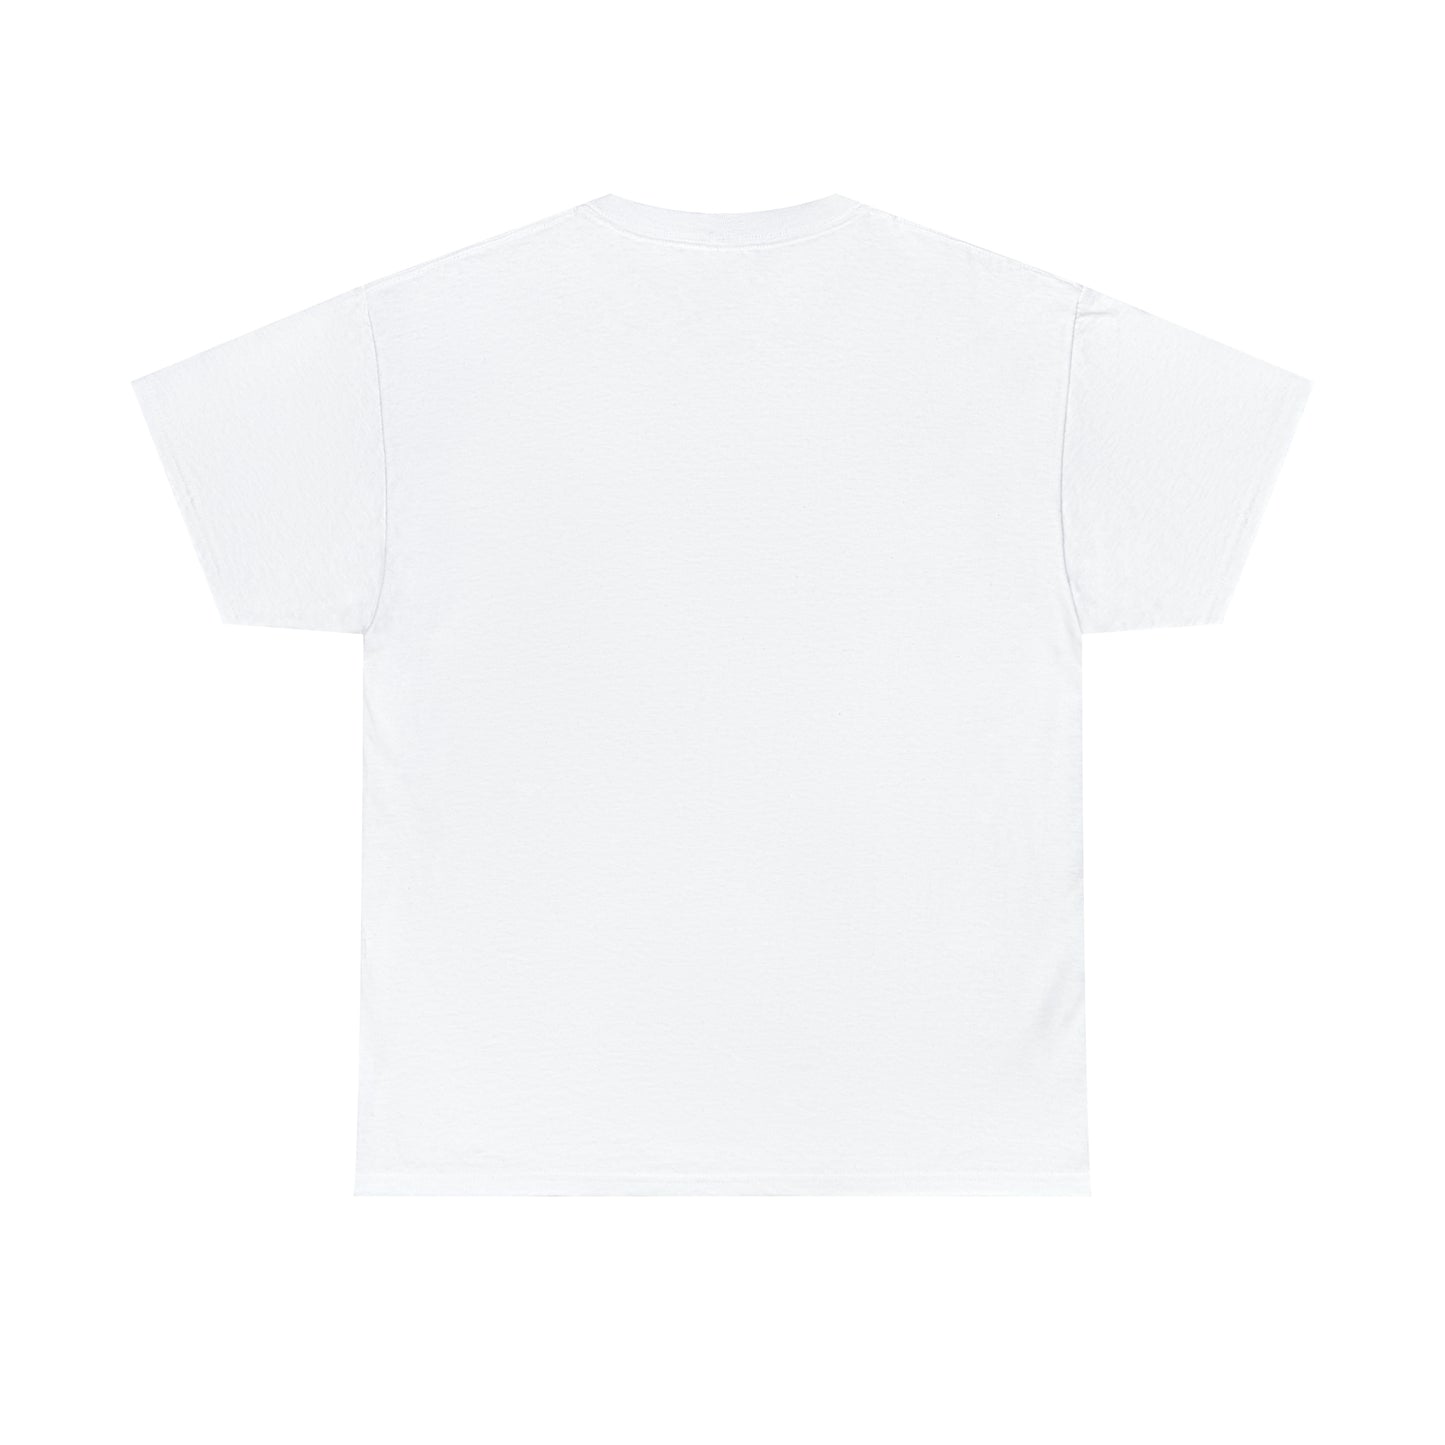 Flat back view of the White t-shirt